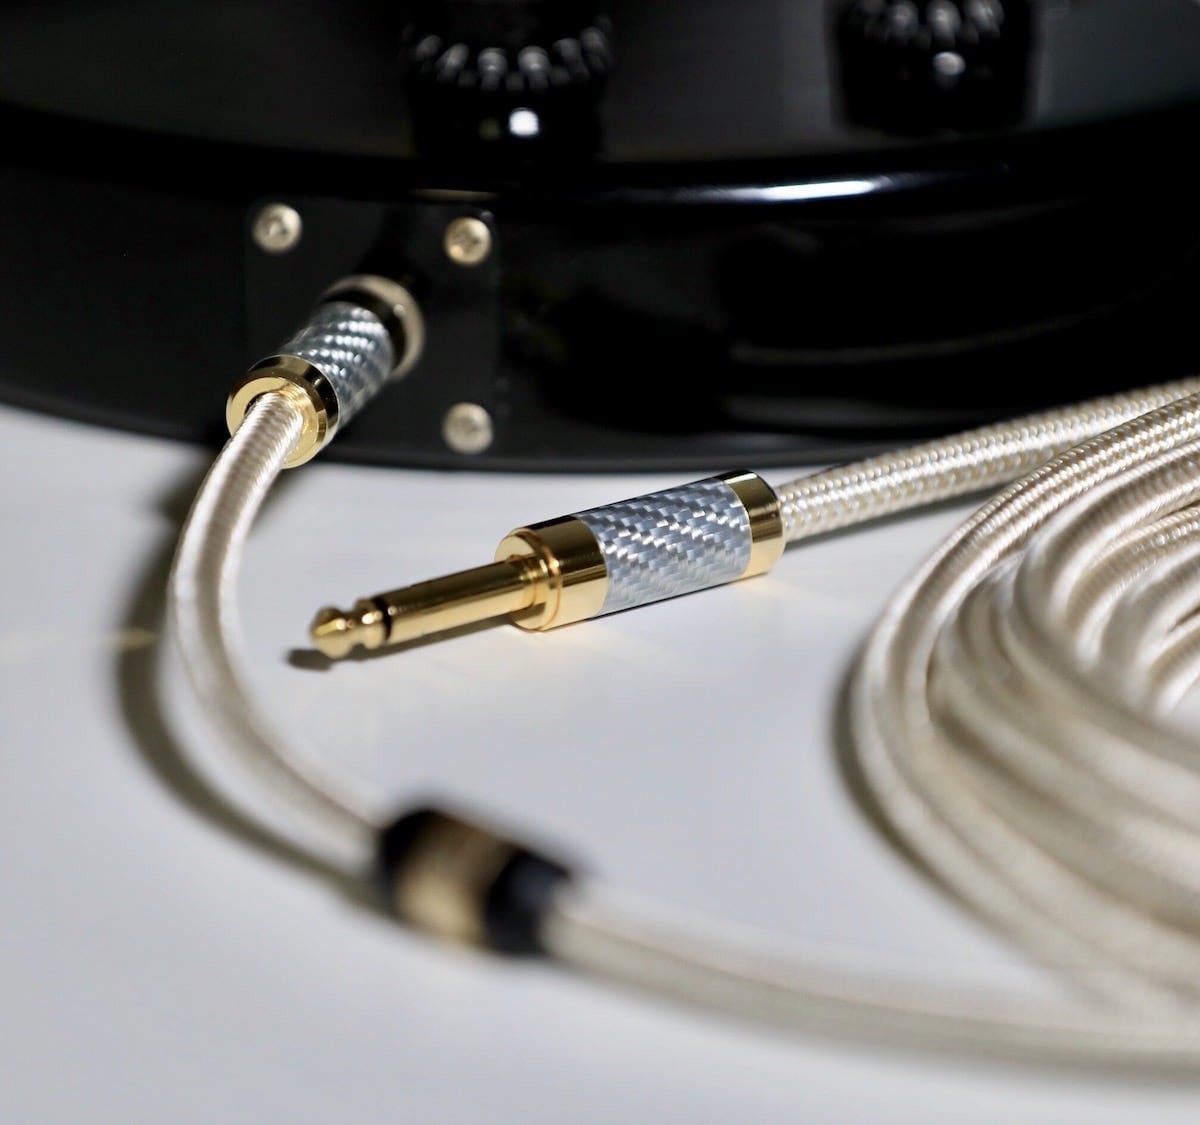 CONSCI Braided Music Instrument and Microphone Cables offer noise-canceling technology